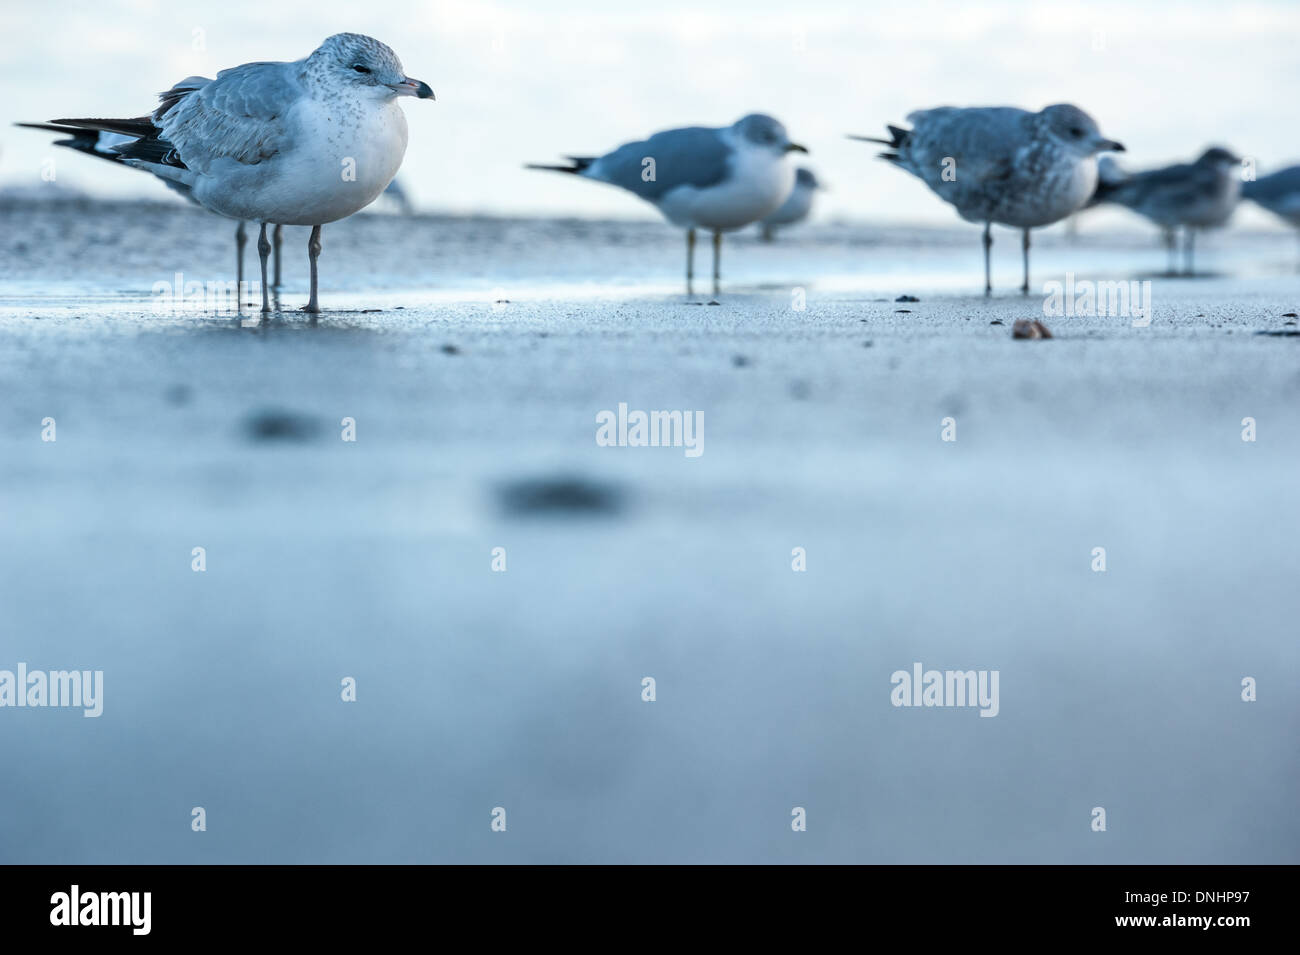 Sand level beach view of seagulls standing at the shoreline in Florida (selective focus on foreground seagull). (USA) Stock Photo